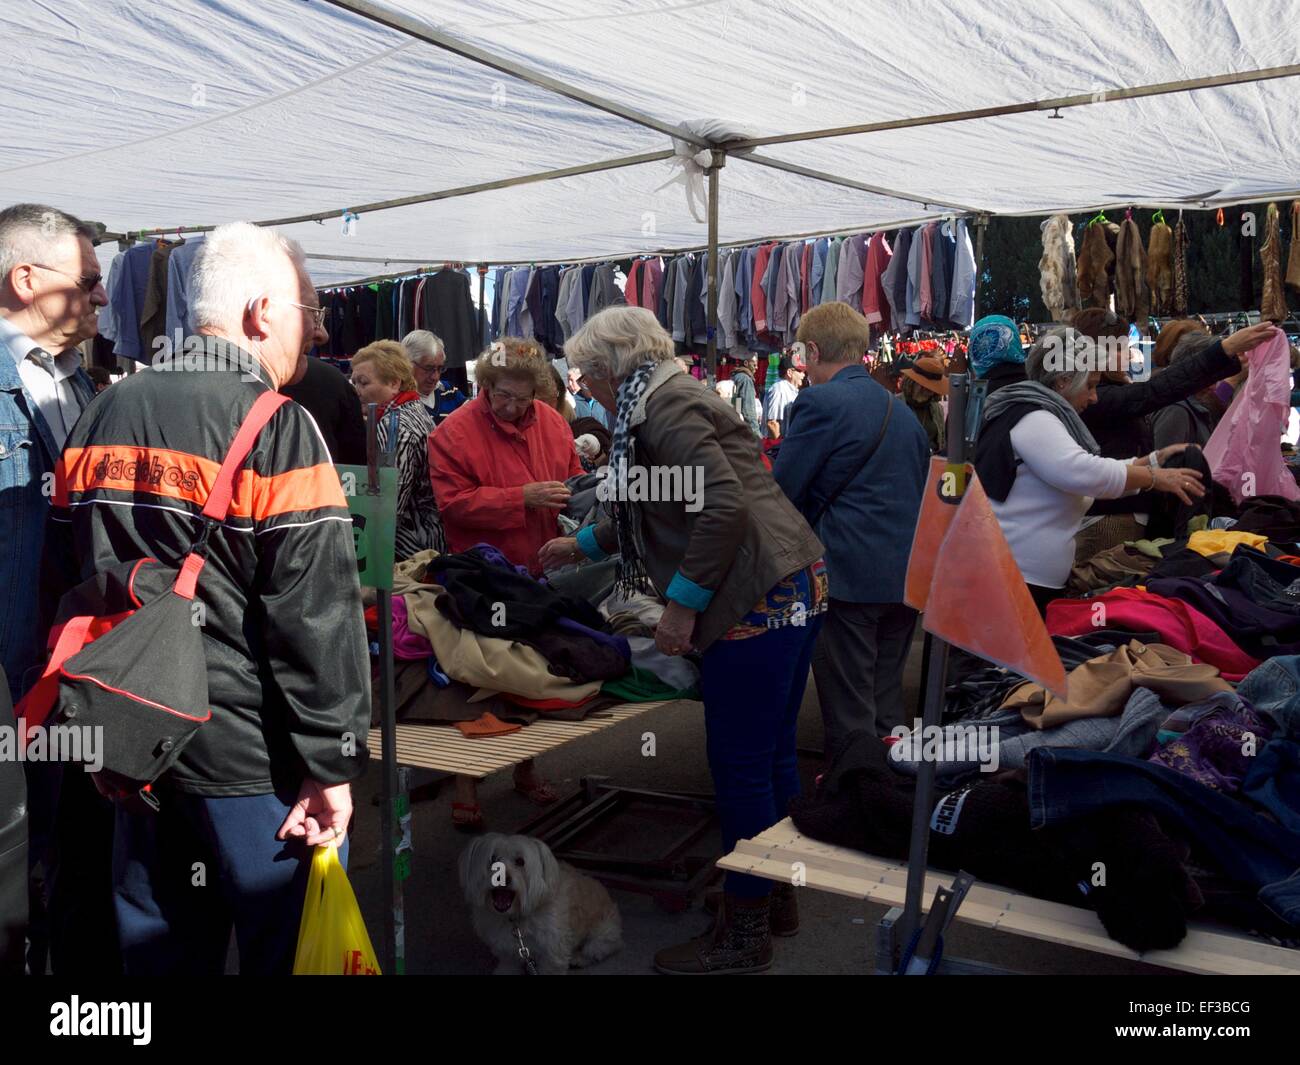 Lots of people at a market in Spain Stock Photo